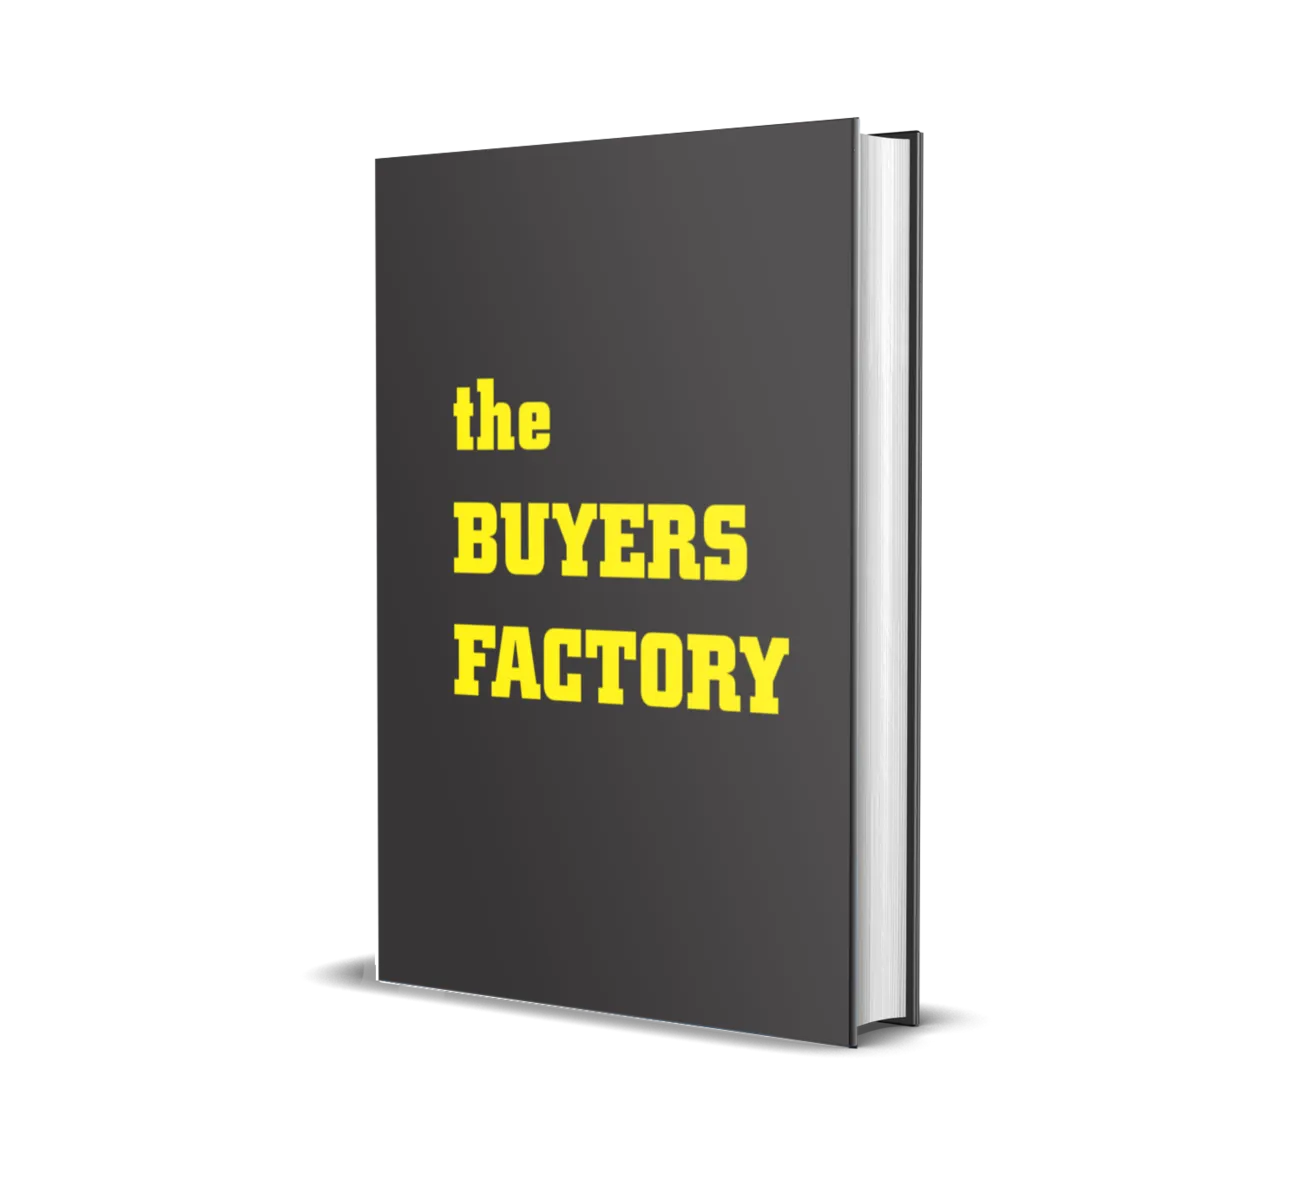 The buyers factory book (preorder, exiting end of 2021)